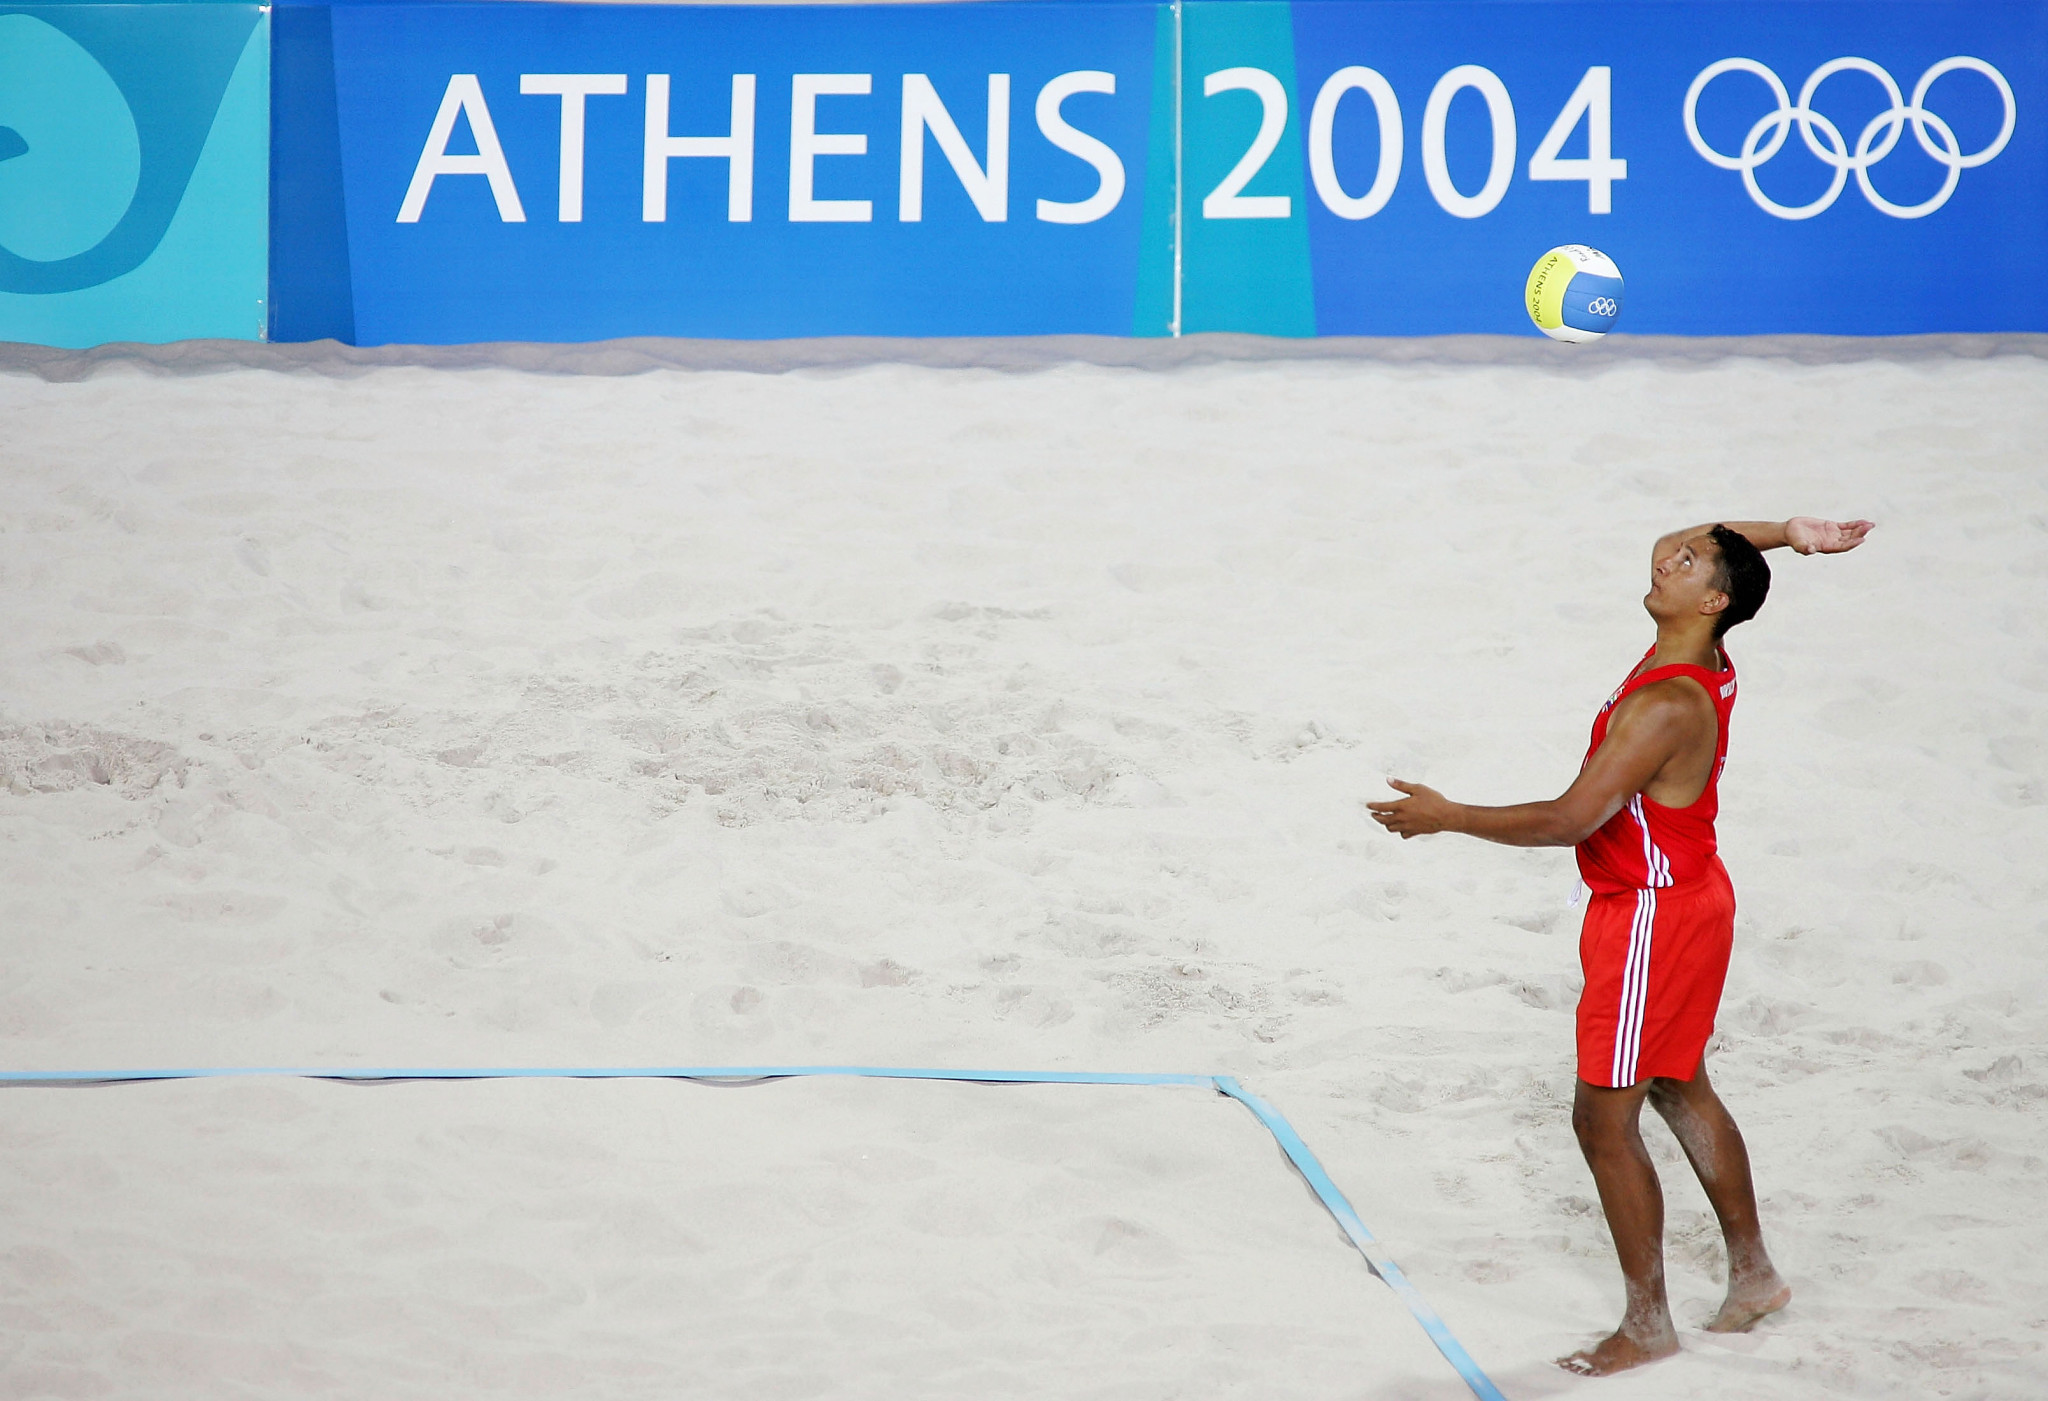 Member of Africa's first Olympic beach volleyball team Rorich dies aged 49